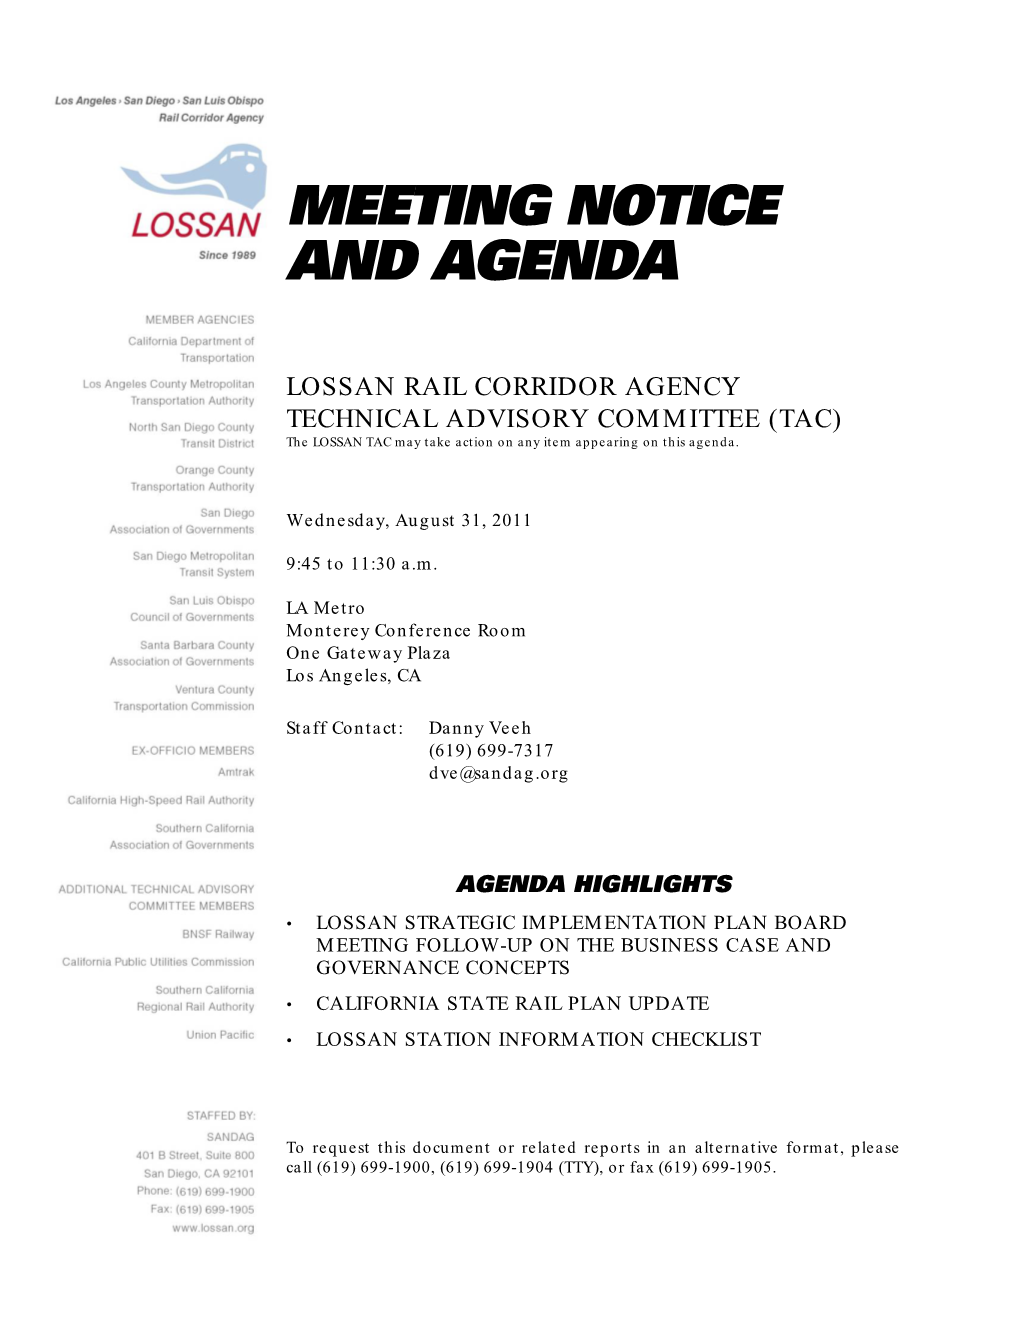 LOSSAN Technical Advisory Committee (TAC) on Any Issue That Is Not on This Agenda